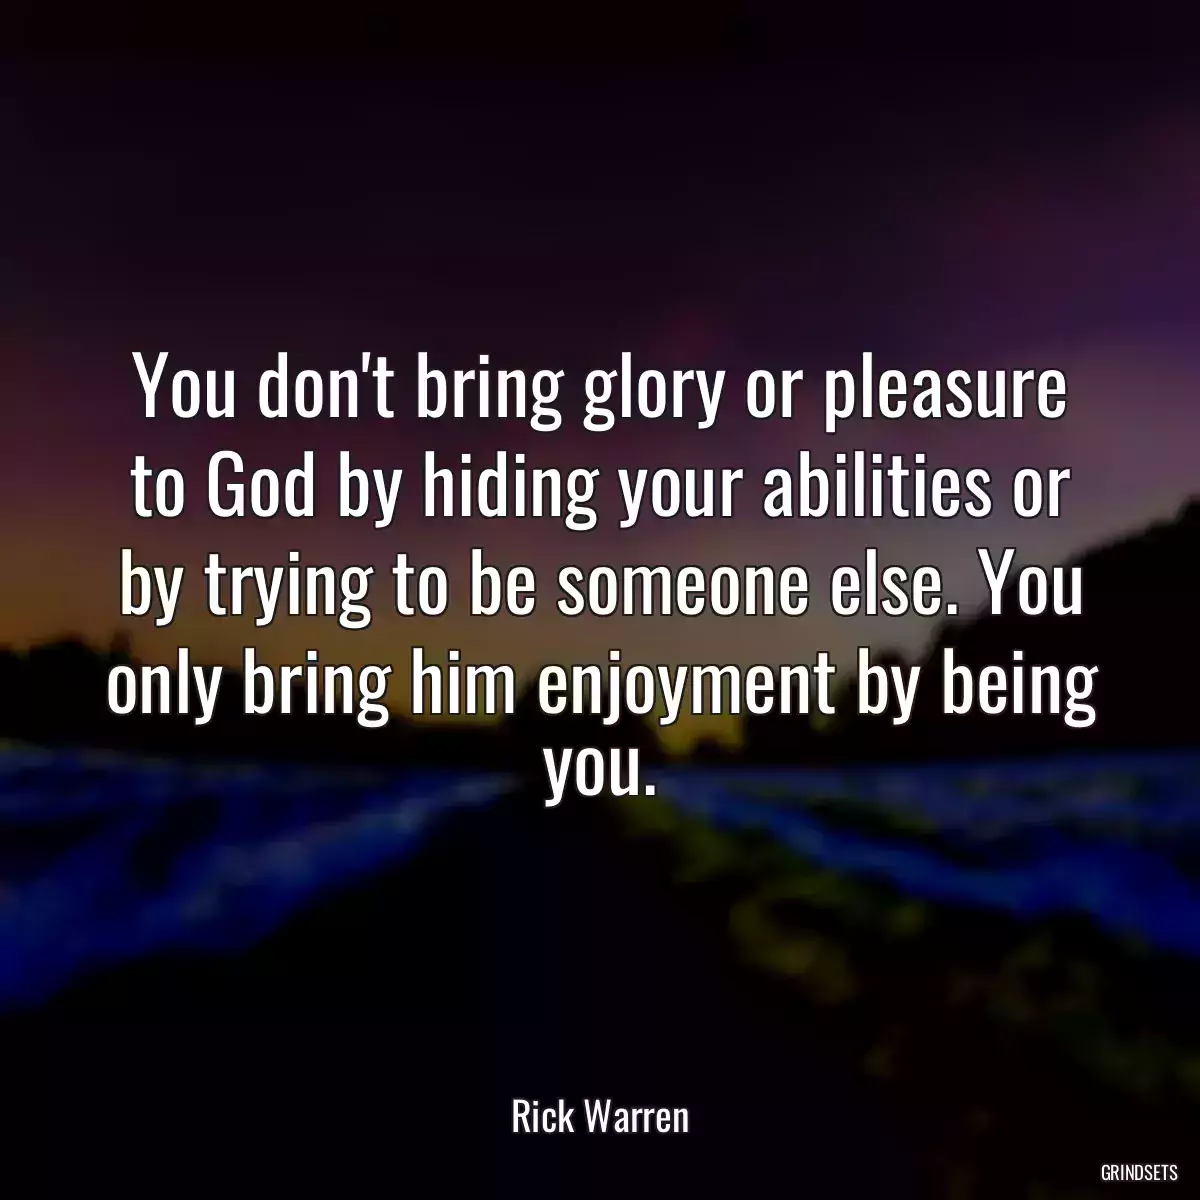 You don\'t bring glory or pleasure to God by hiding your abilities or by trying to be someone else. You only bring him enjoyment by being you.